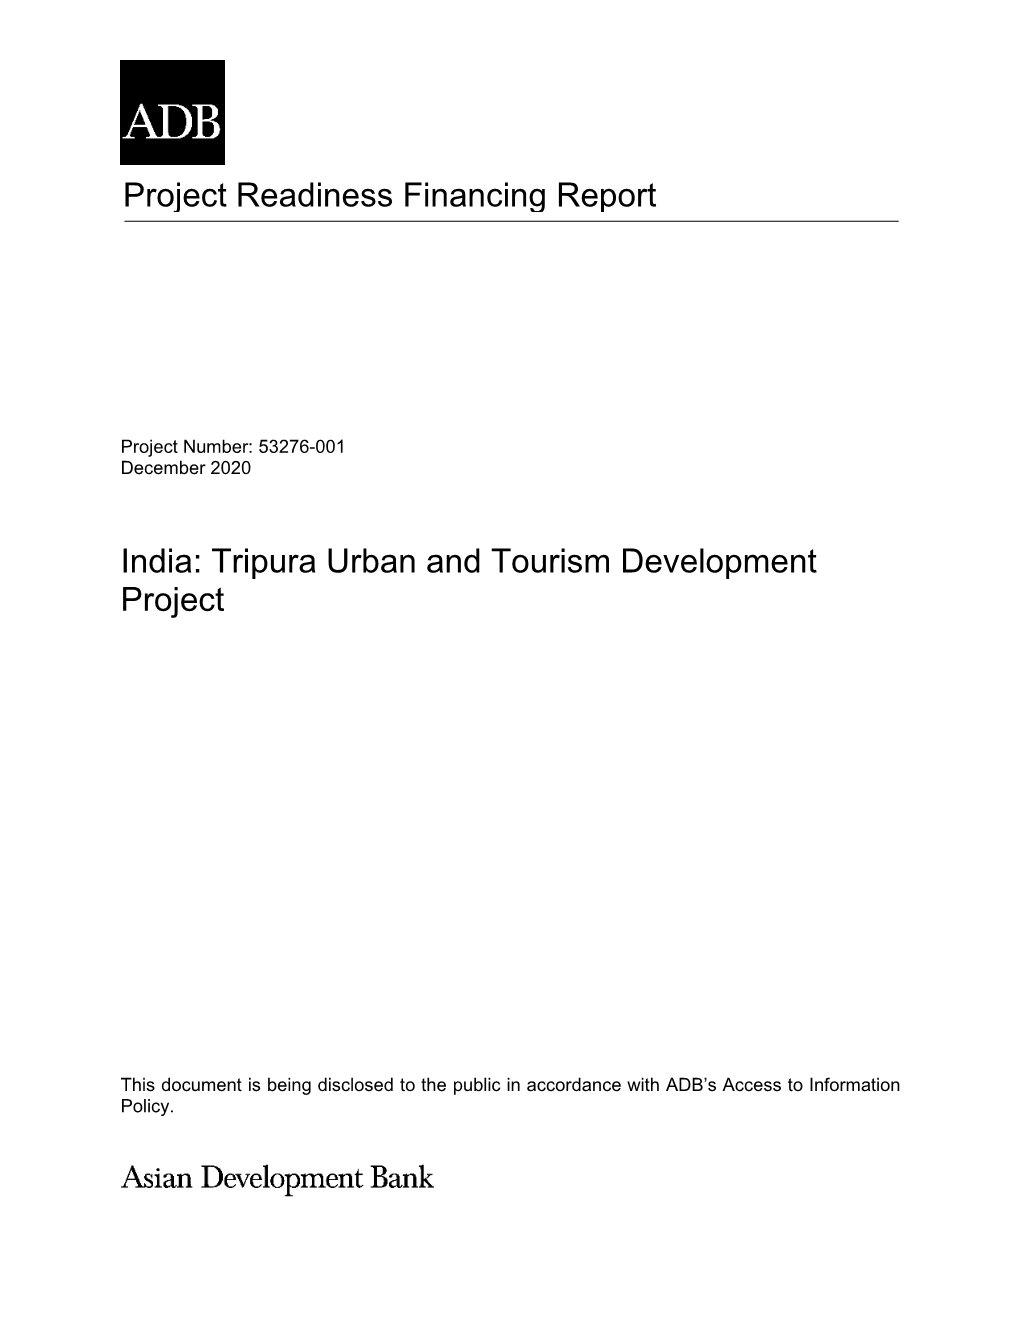 Project Readiness Financing Report India: Tripura Urban and Tourism Development Project